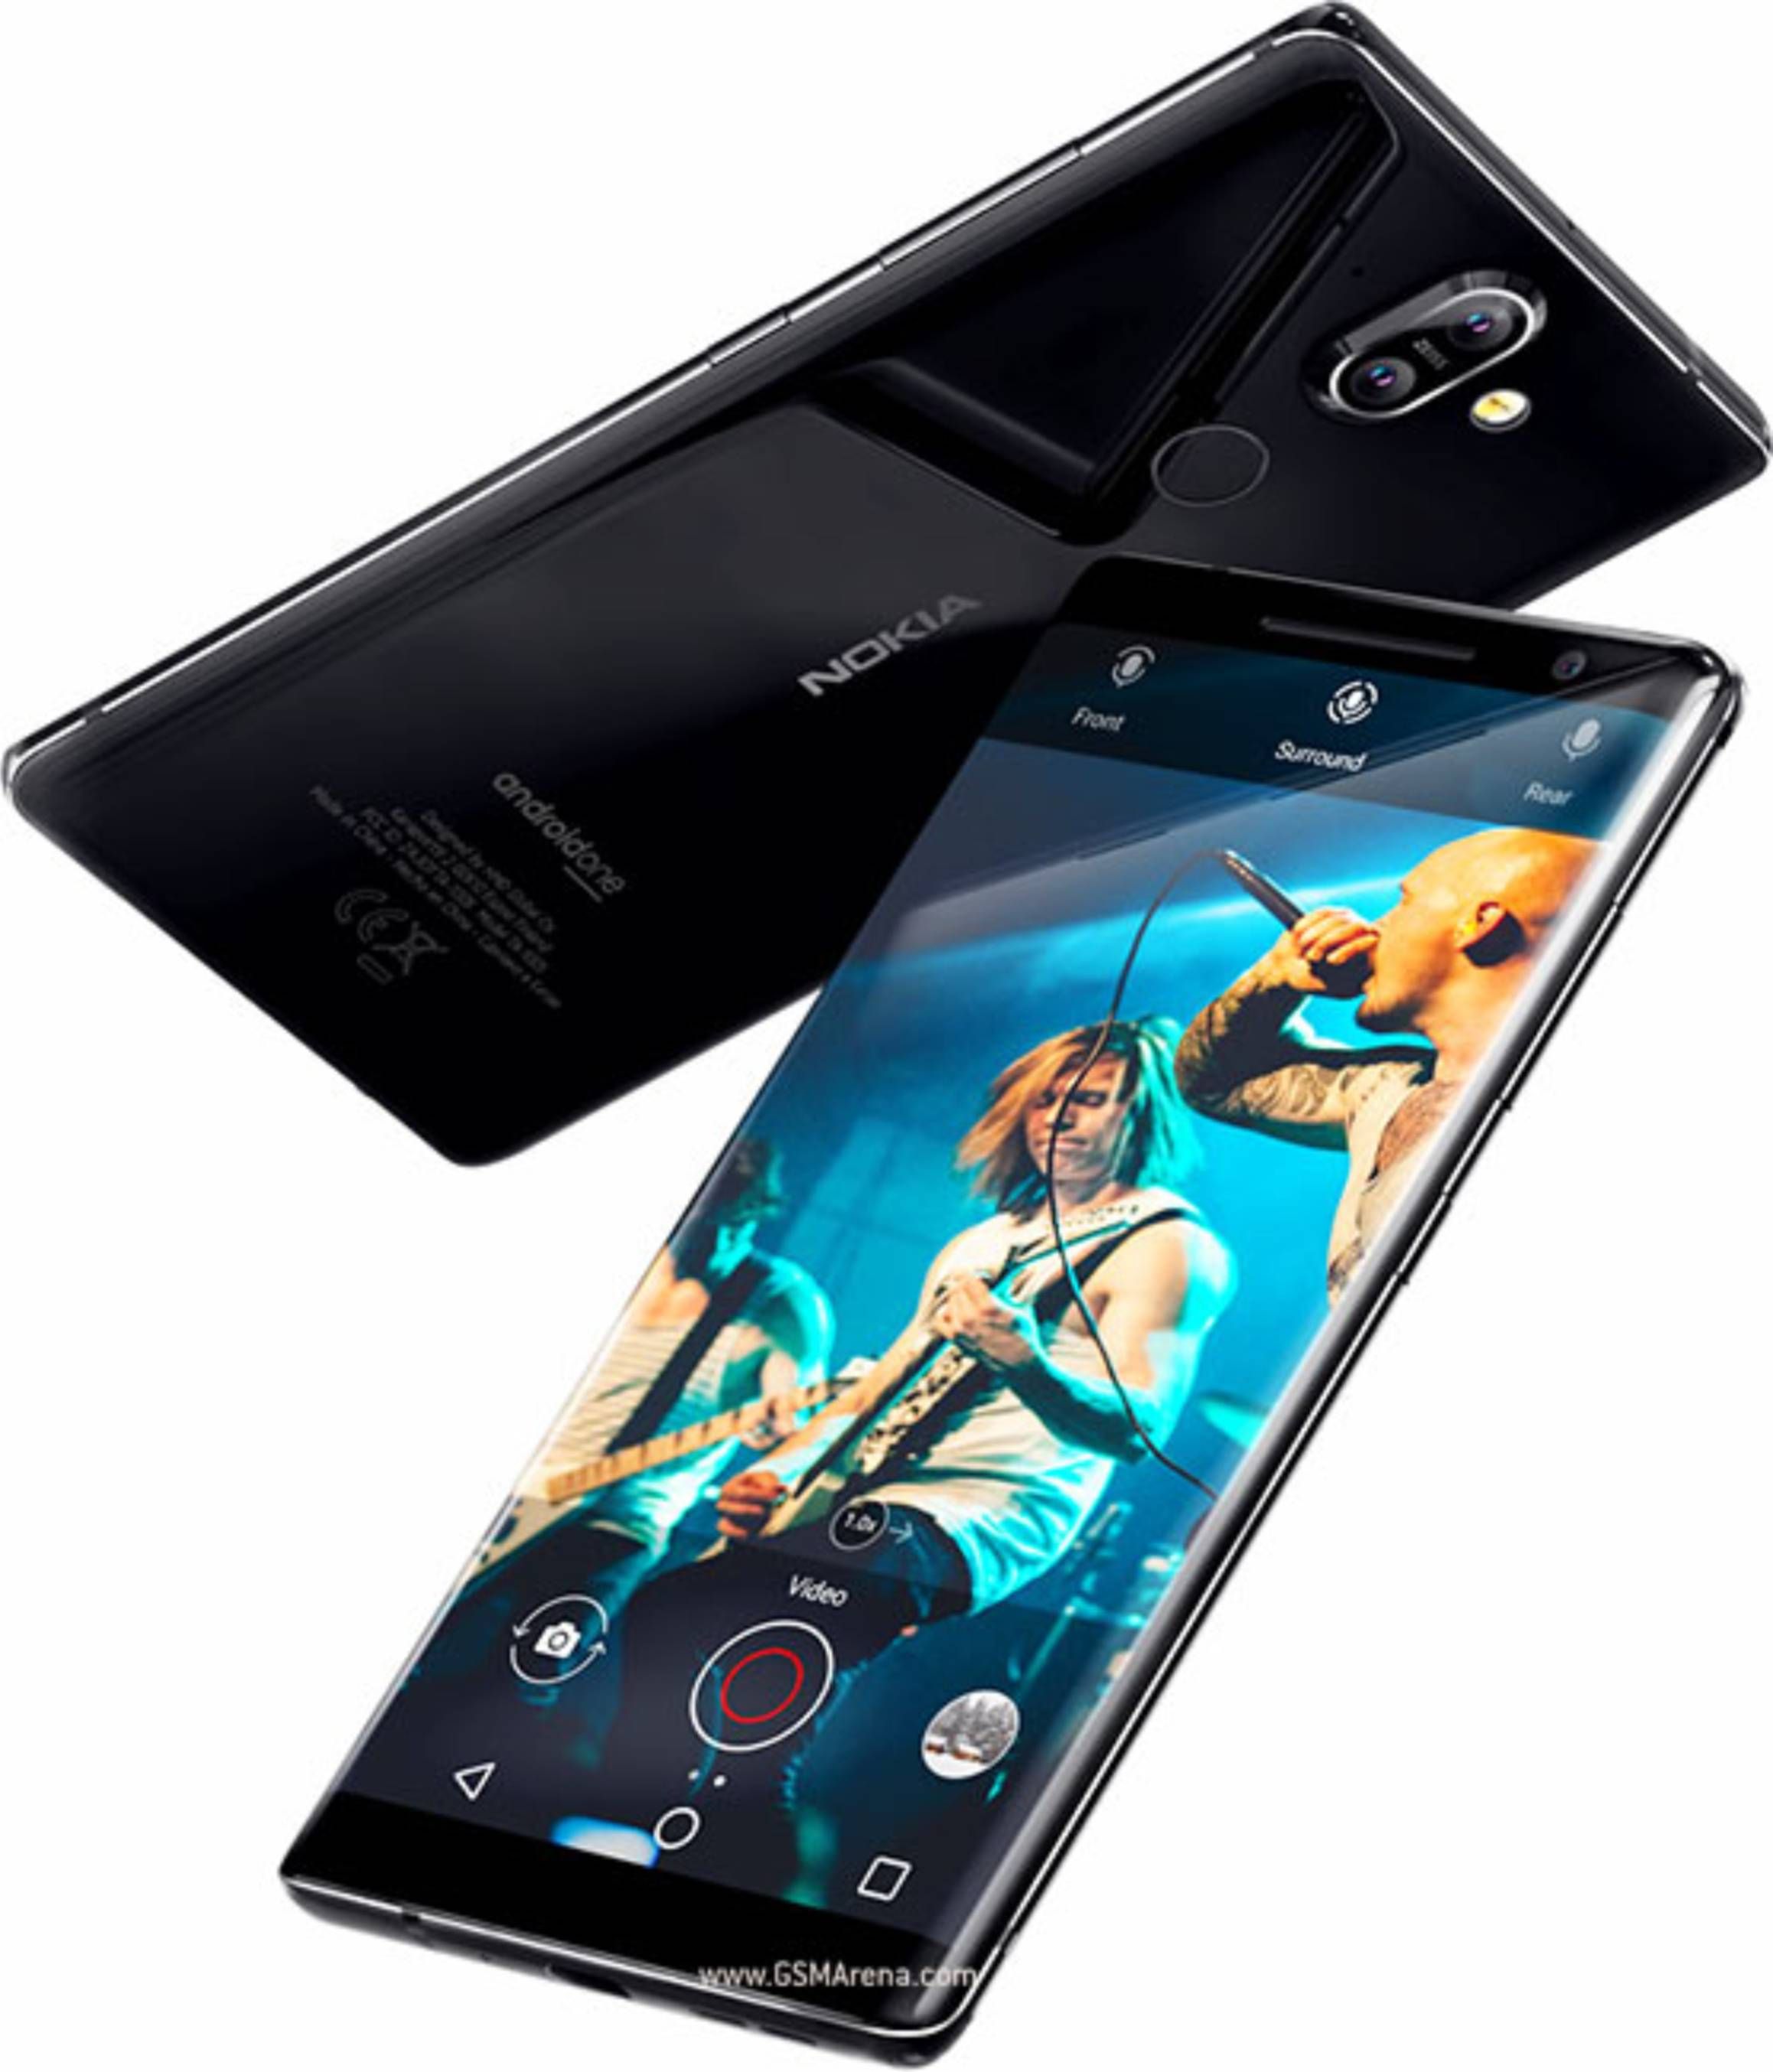 What is Nokia 8 Sirocco Screen Replacement Cost in Nairobi?